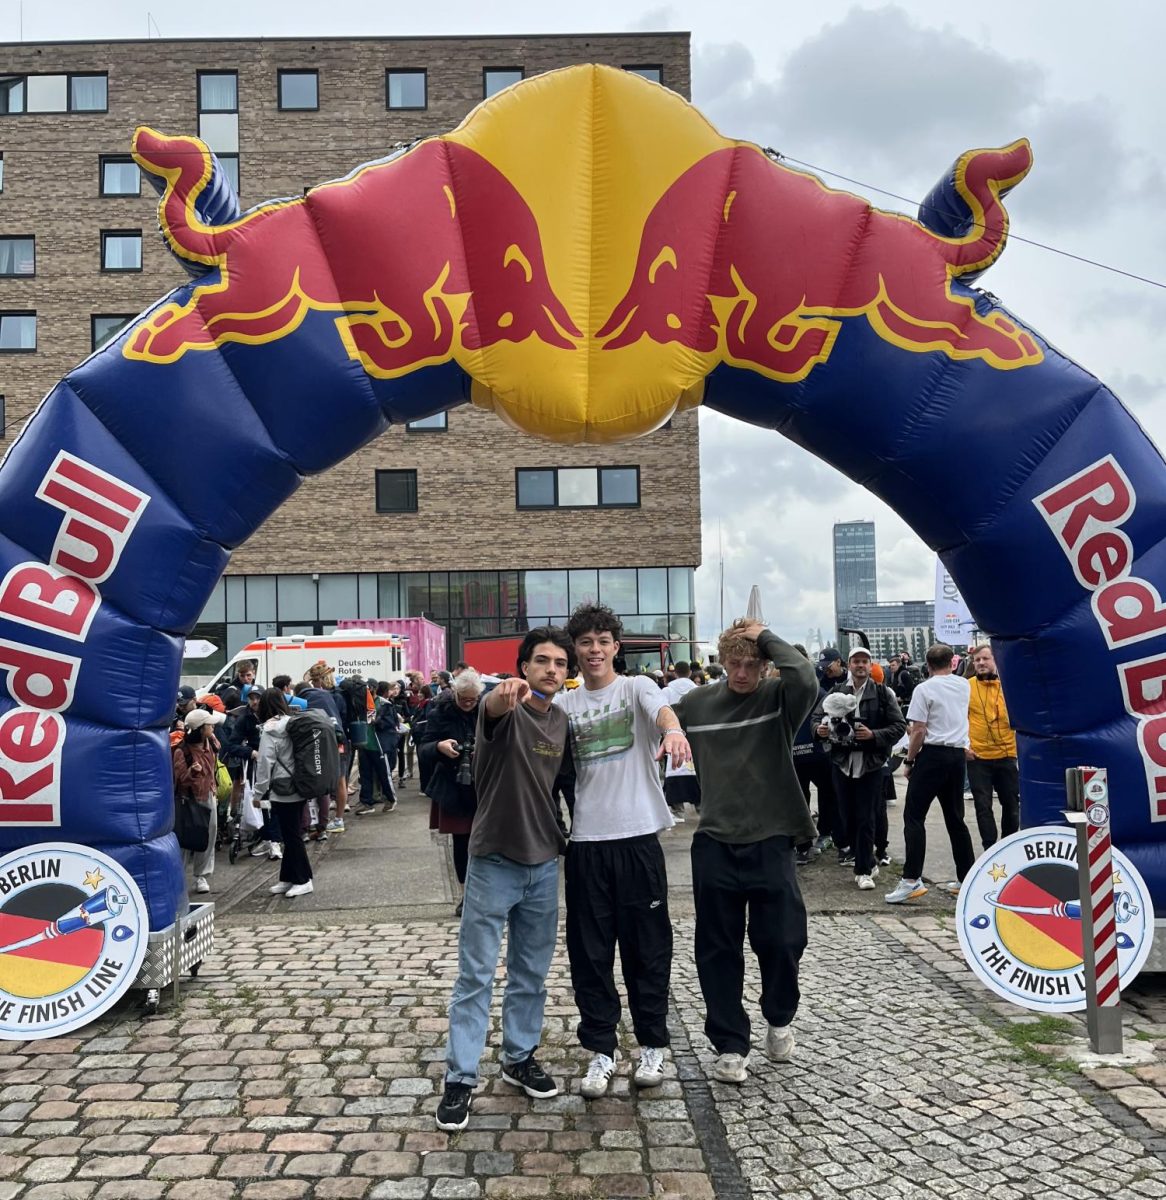 The+Connoisseurs+at+the+Red+Bull+Can+You+Make+It+finish+line+in+Berlin%2C+Germany+on+May+28%2C+2024.+%28Photo+Courtesy+of+Zuni+Olivares%29